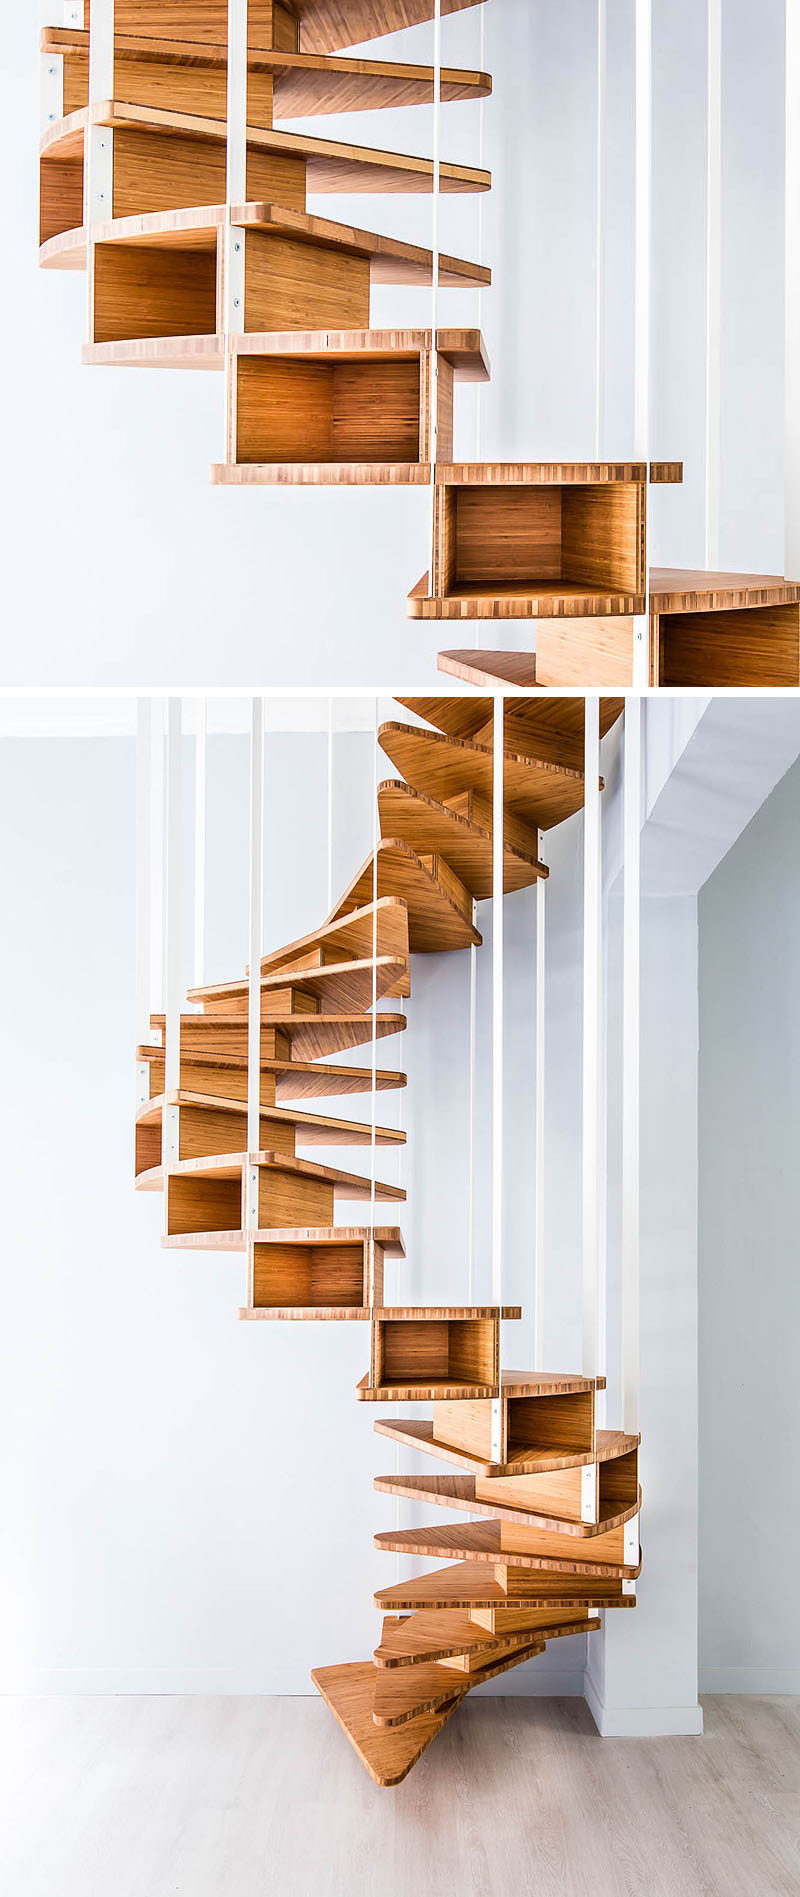 18 Examples Of Stair Details To Inspire You // This spiral wood staircase has open cubbies in each of the steps to provide extra storage.